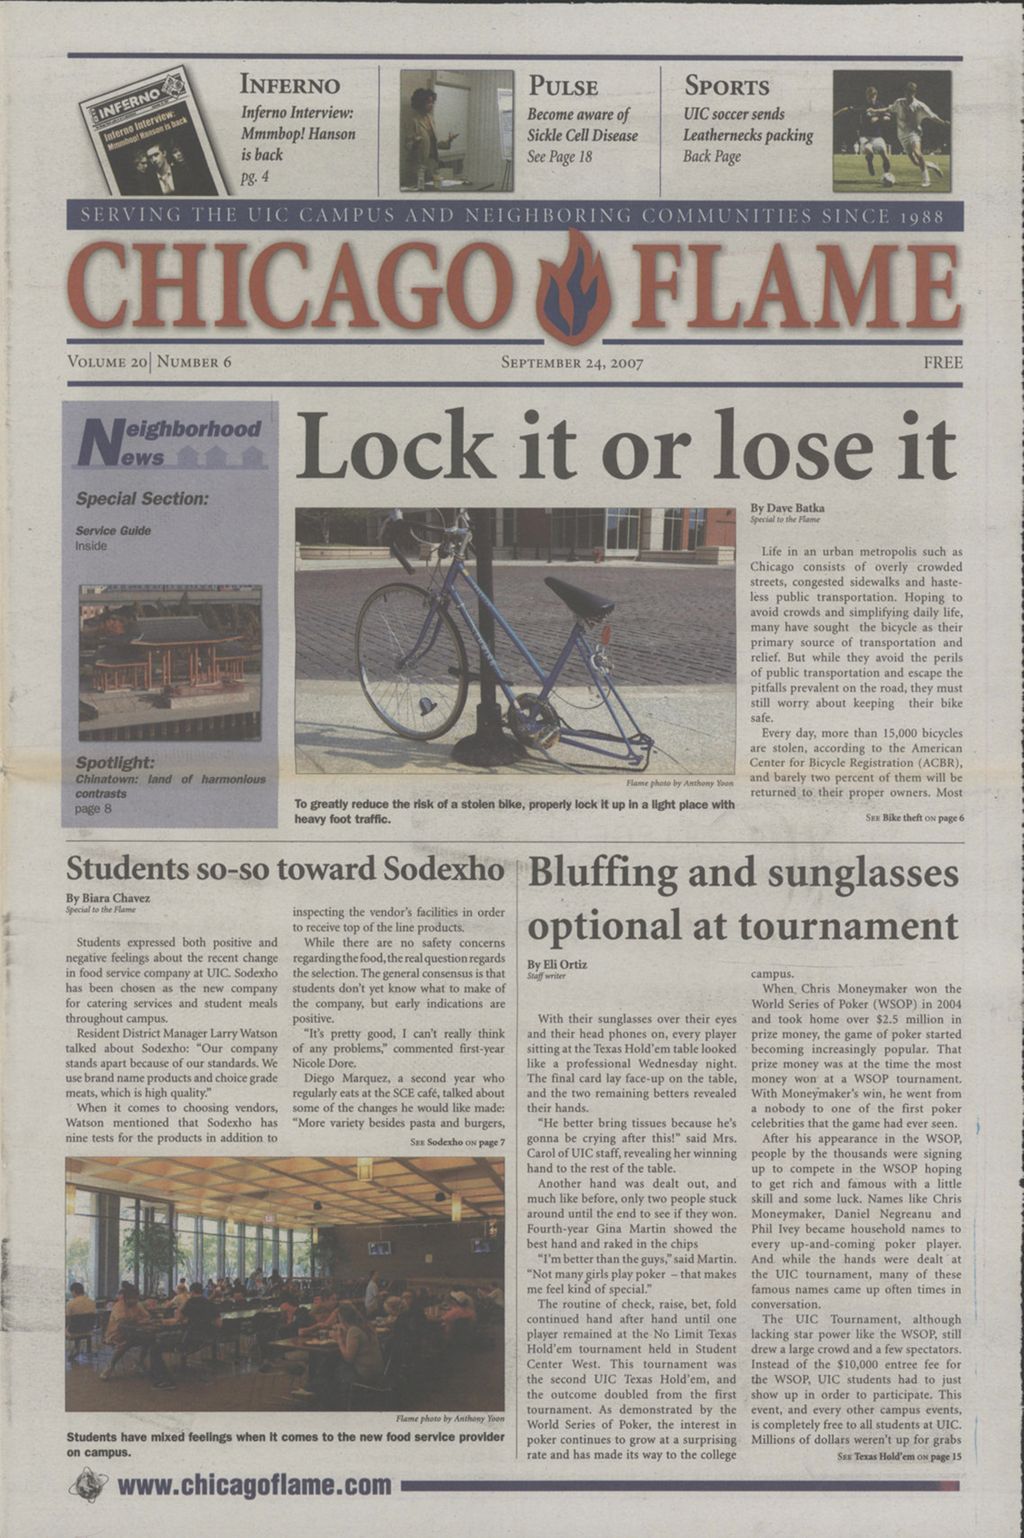 Miniature of Chicago Flame (September 24, 2007)